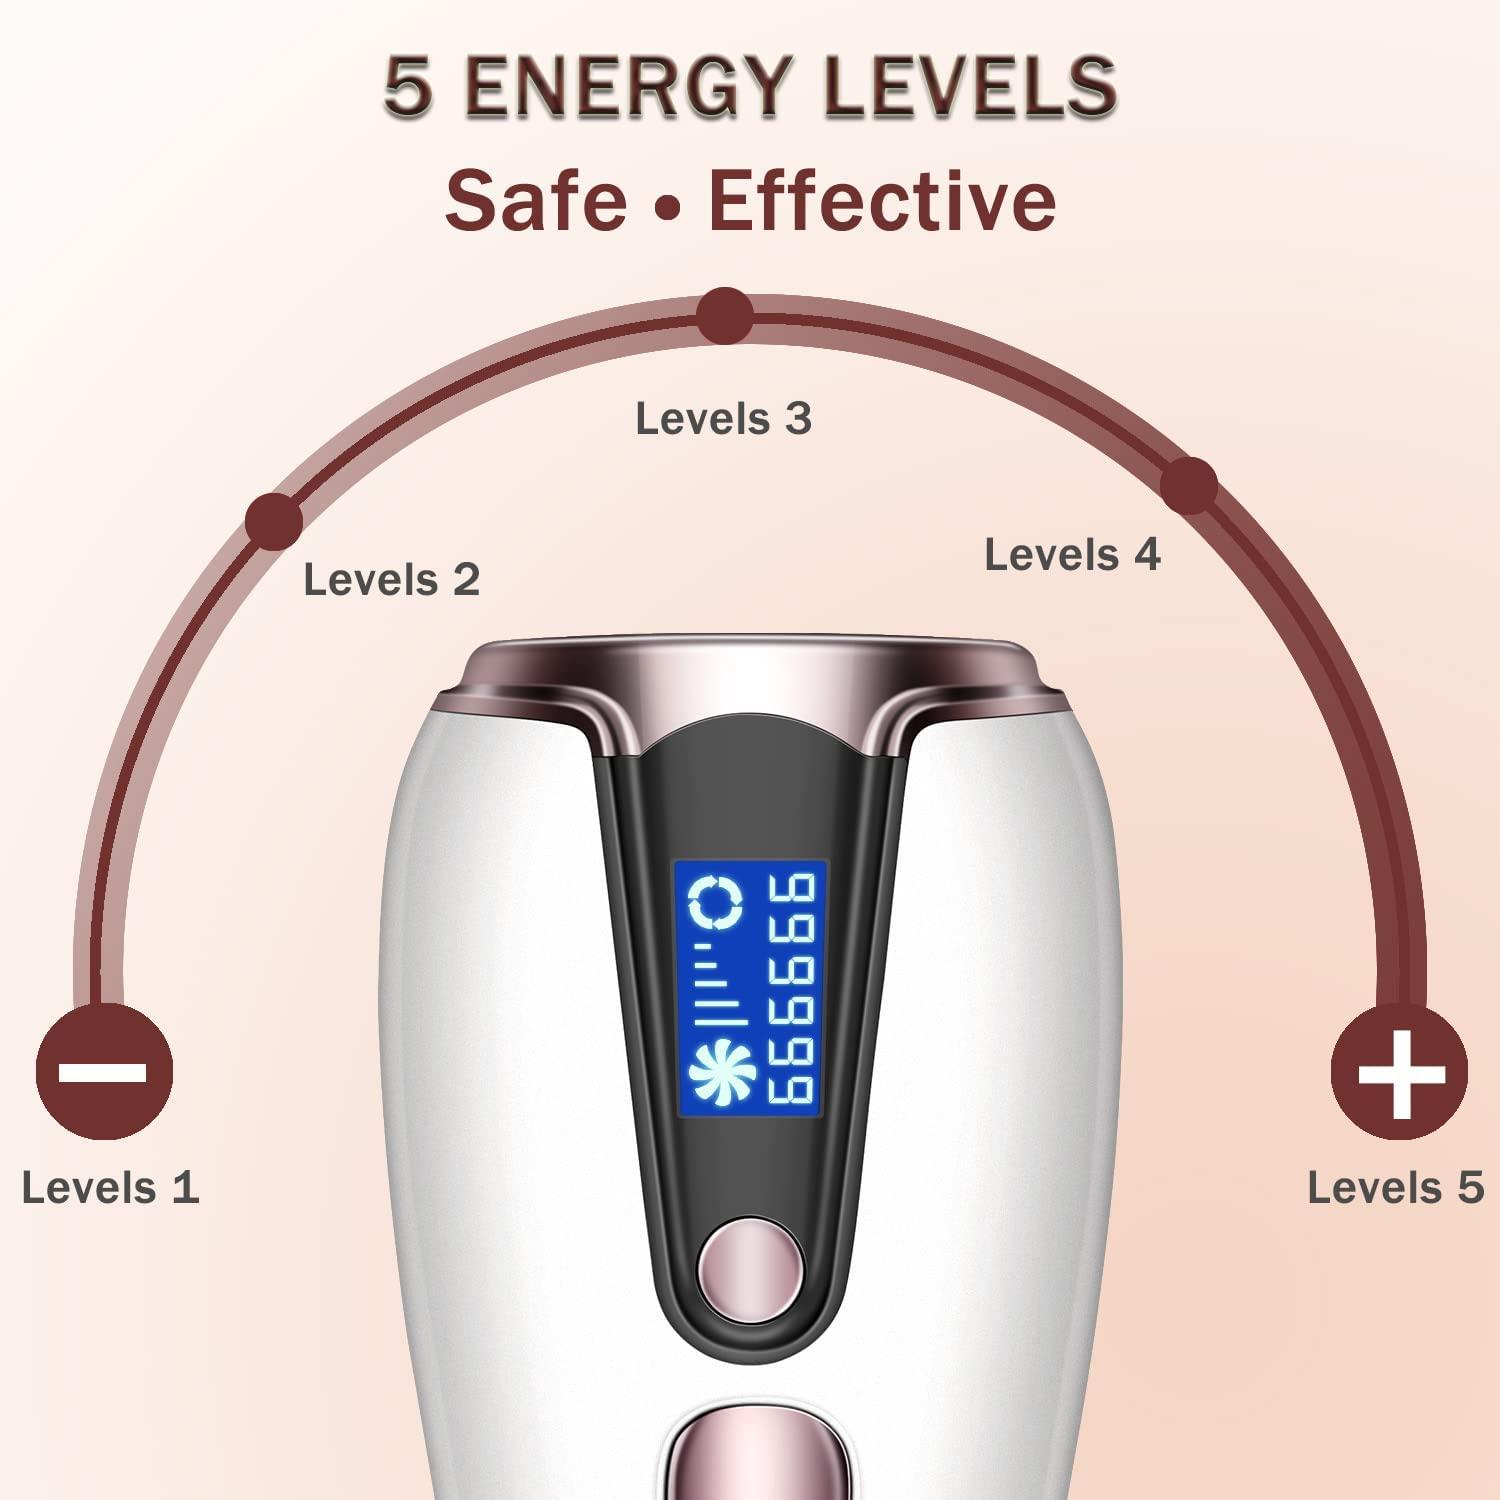 at-Home Hair Removal for Women & Men, Upgraded to 999,999 Flashes Laser Hair  Removal, Permanent Painless Hair Removal Device for Facial Whole Body